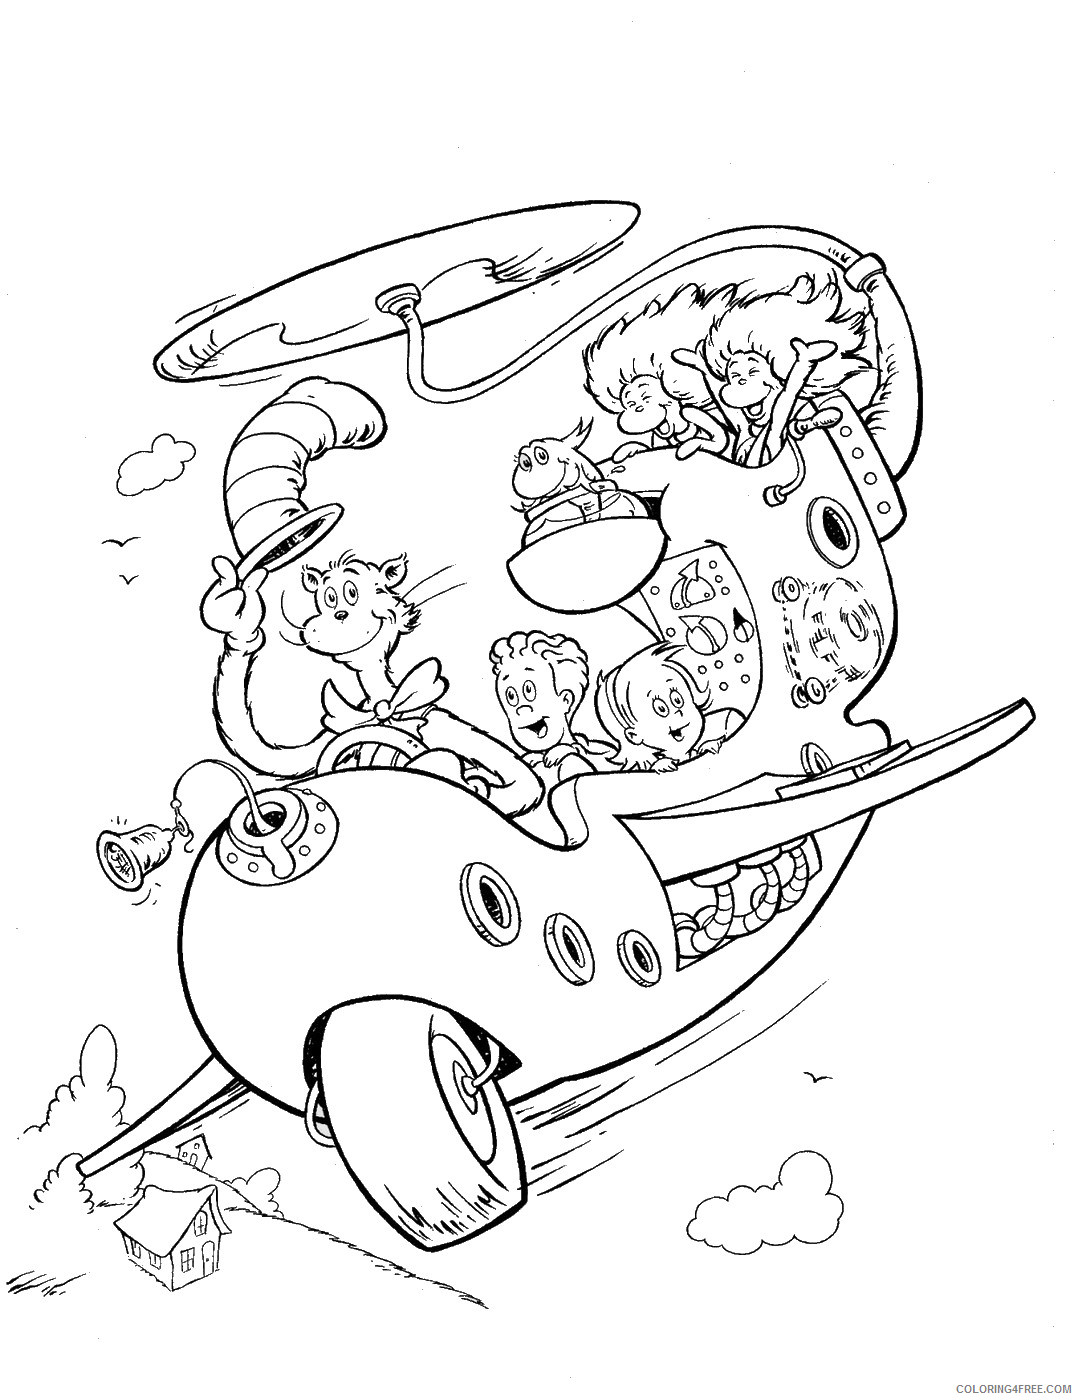 The Cat in the Hat Coloring Pages Cartoons cat_hat_cl_20 Printable 2020 6383 Coloring4free